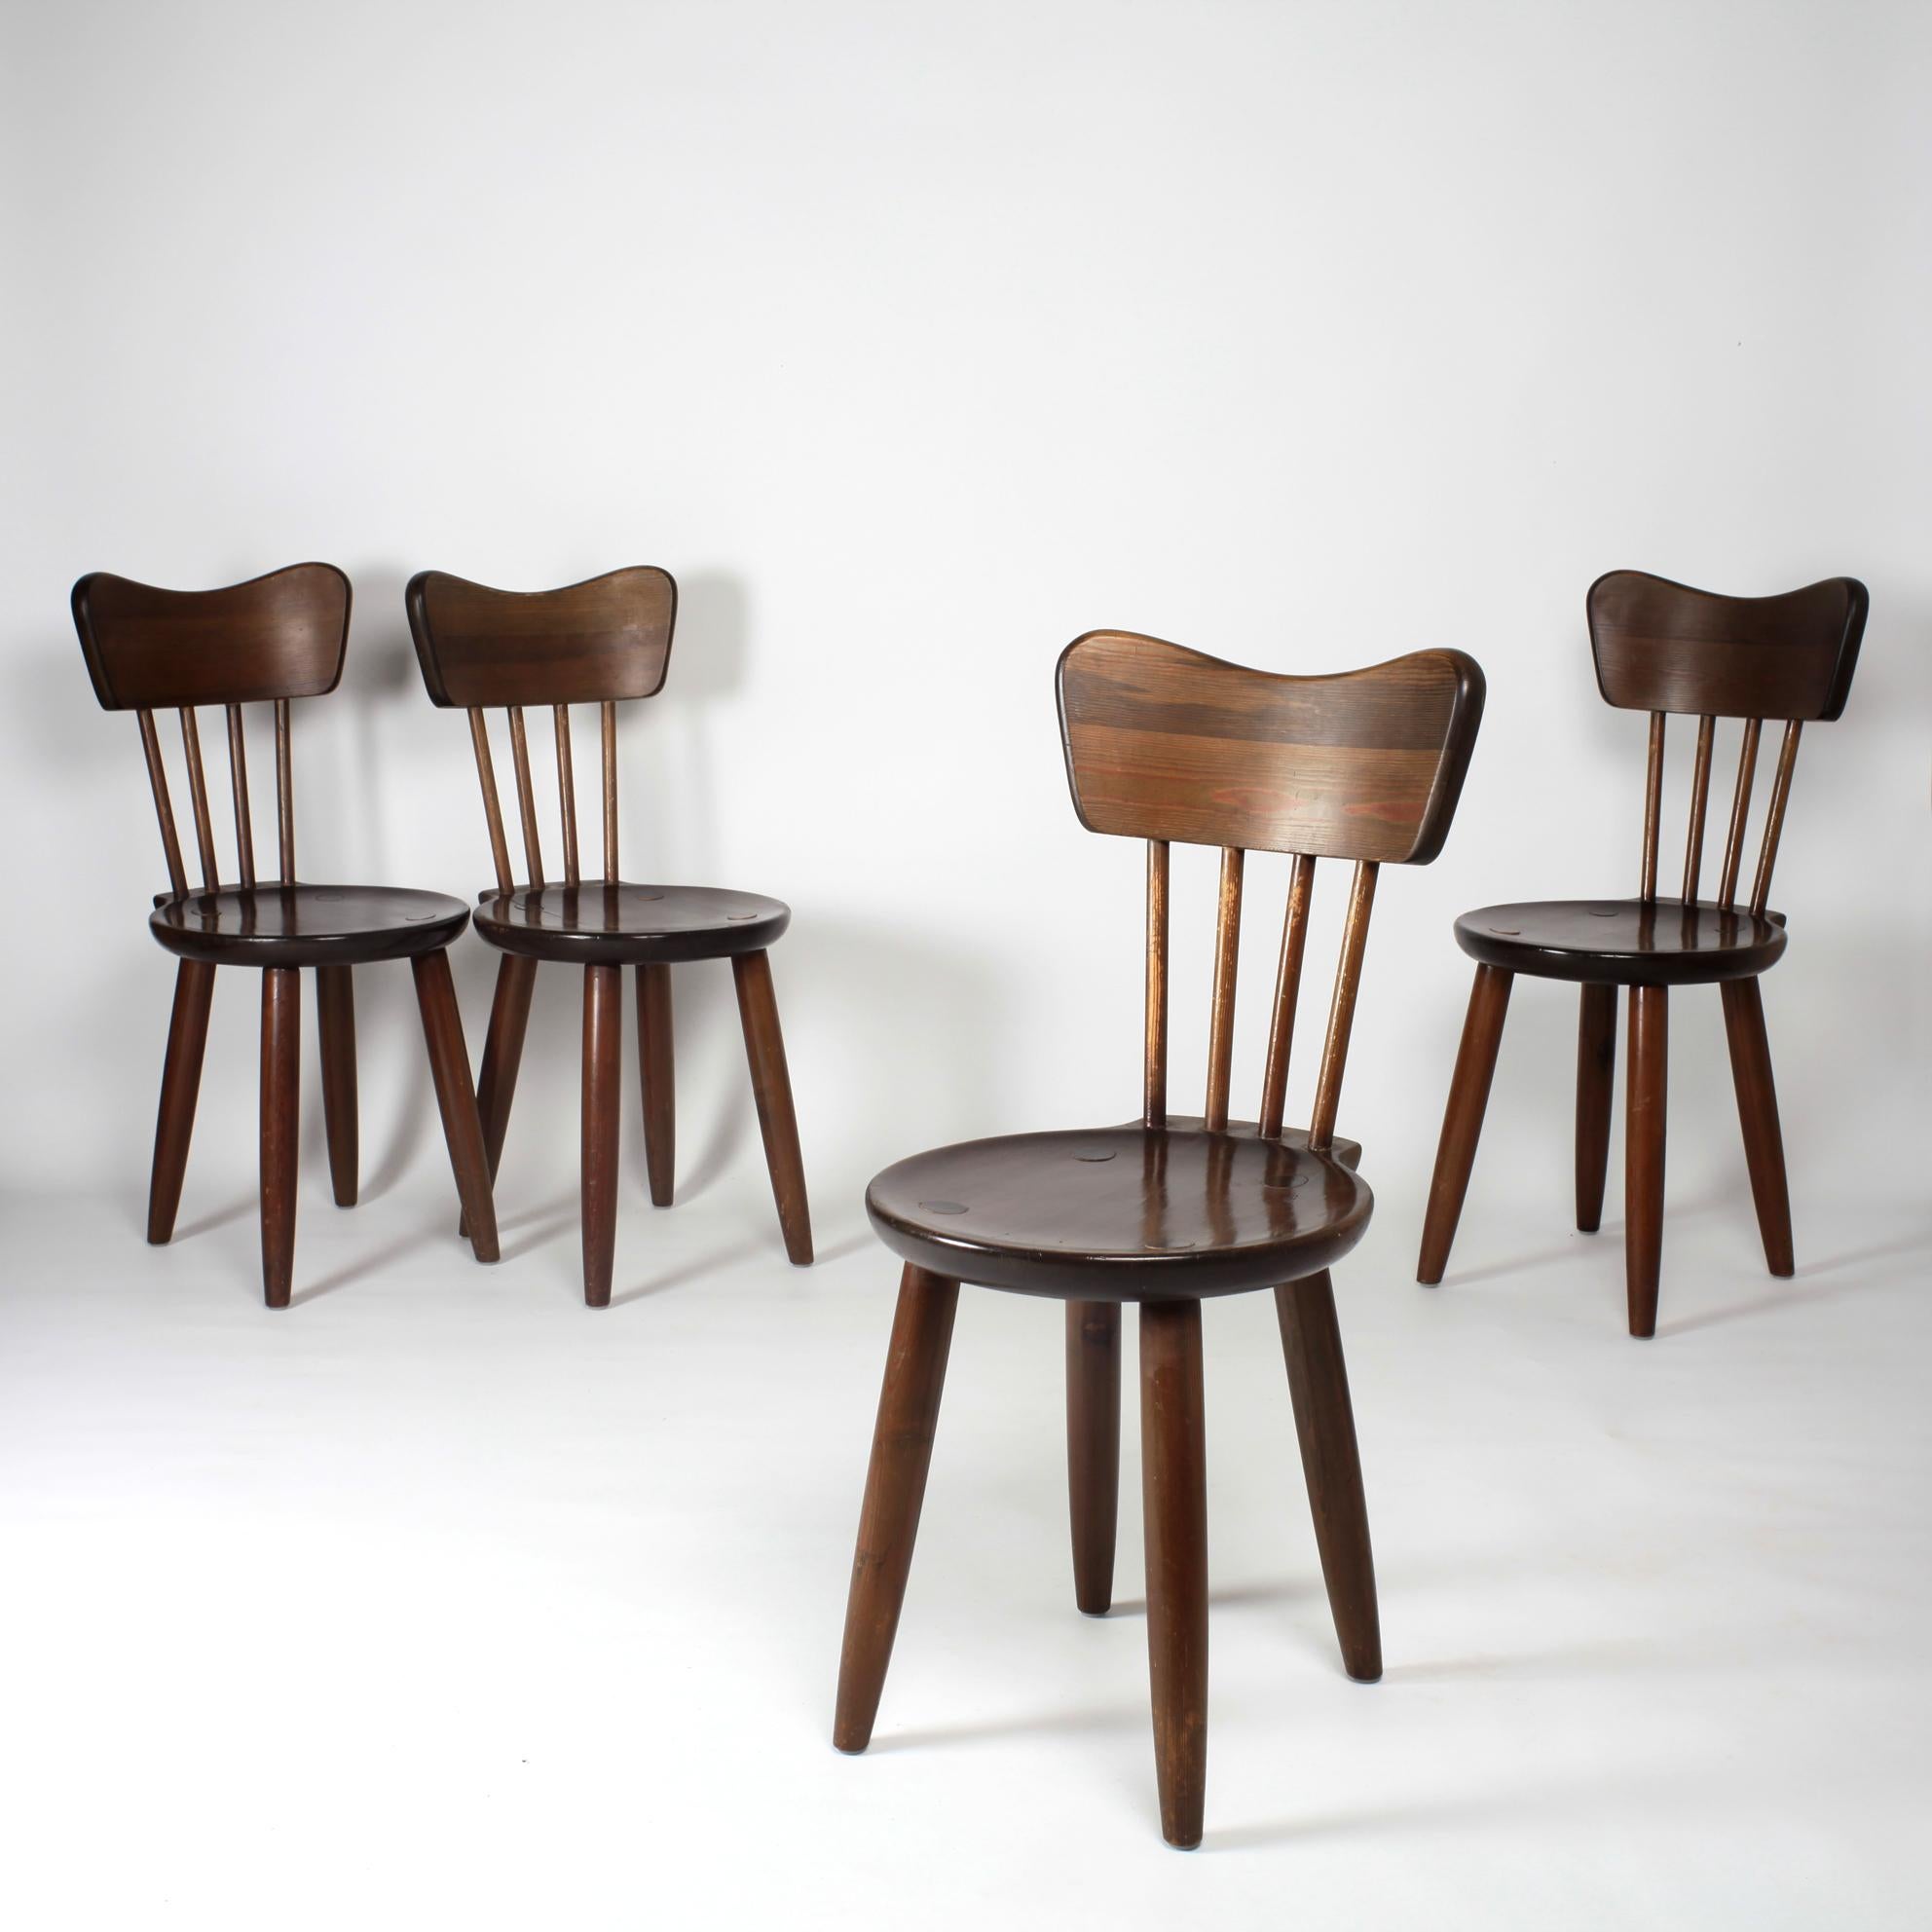 Scandinavian Modern Swedish Chairs in Solid Pine Wood 1930 by Torsten Claeson For Sale